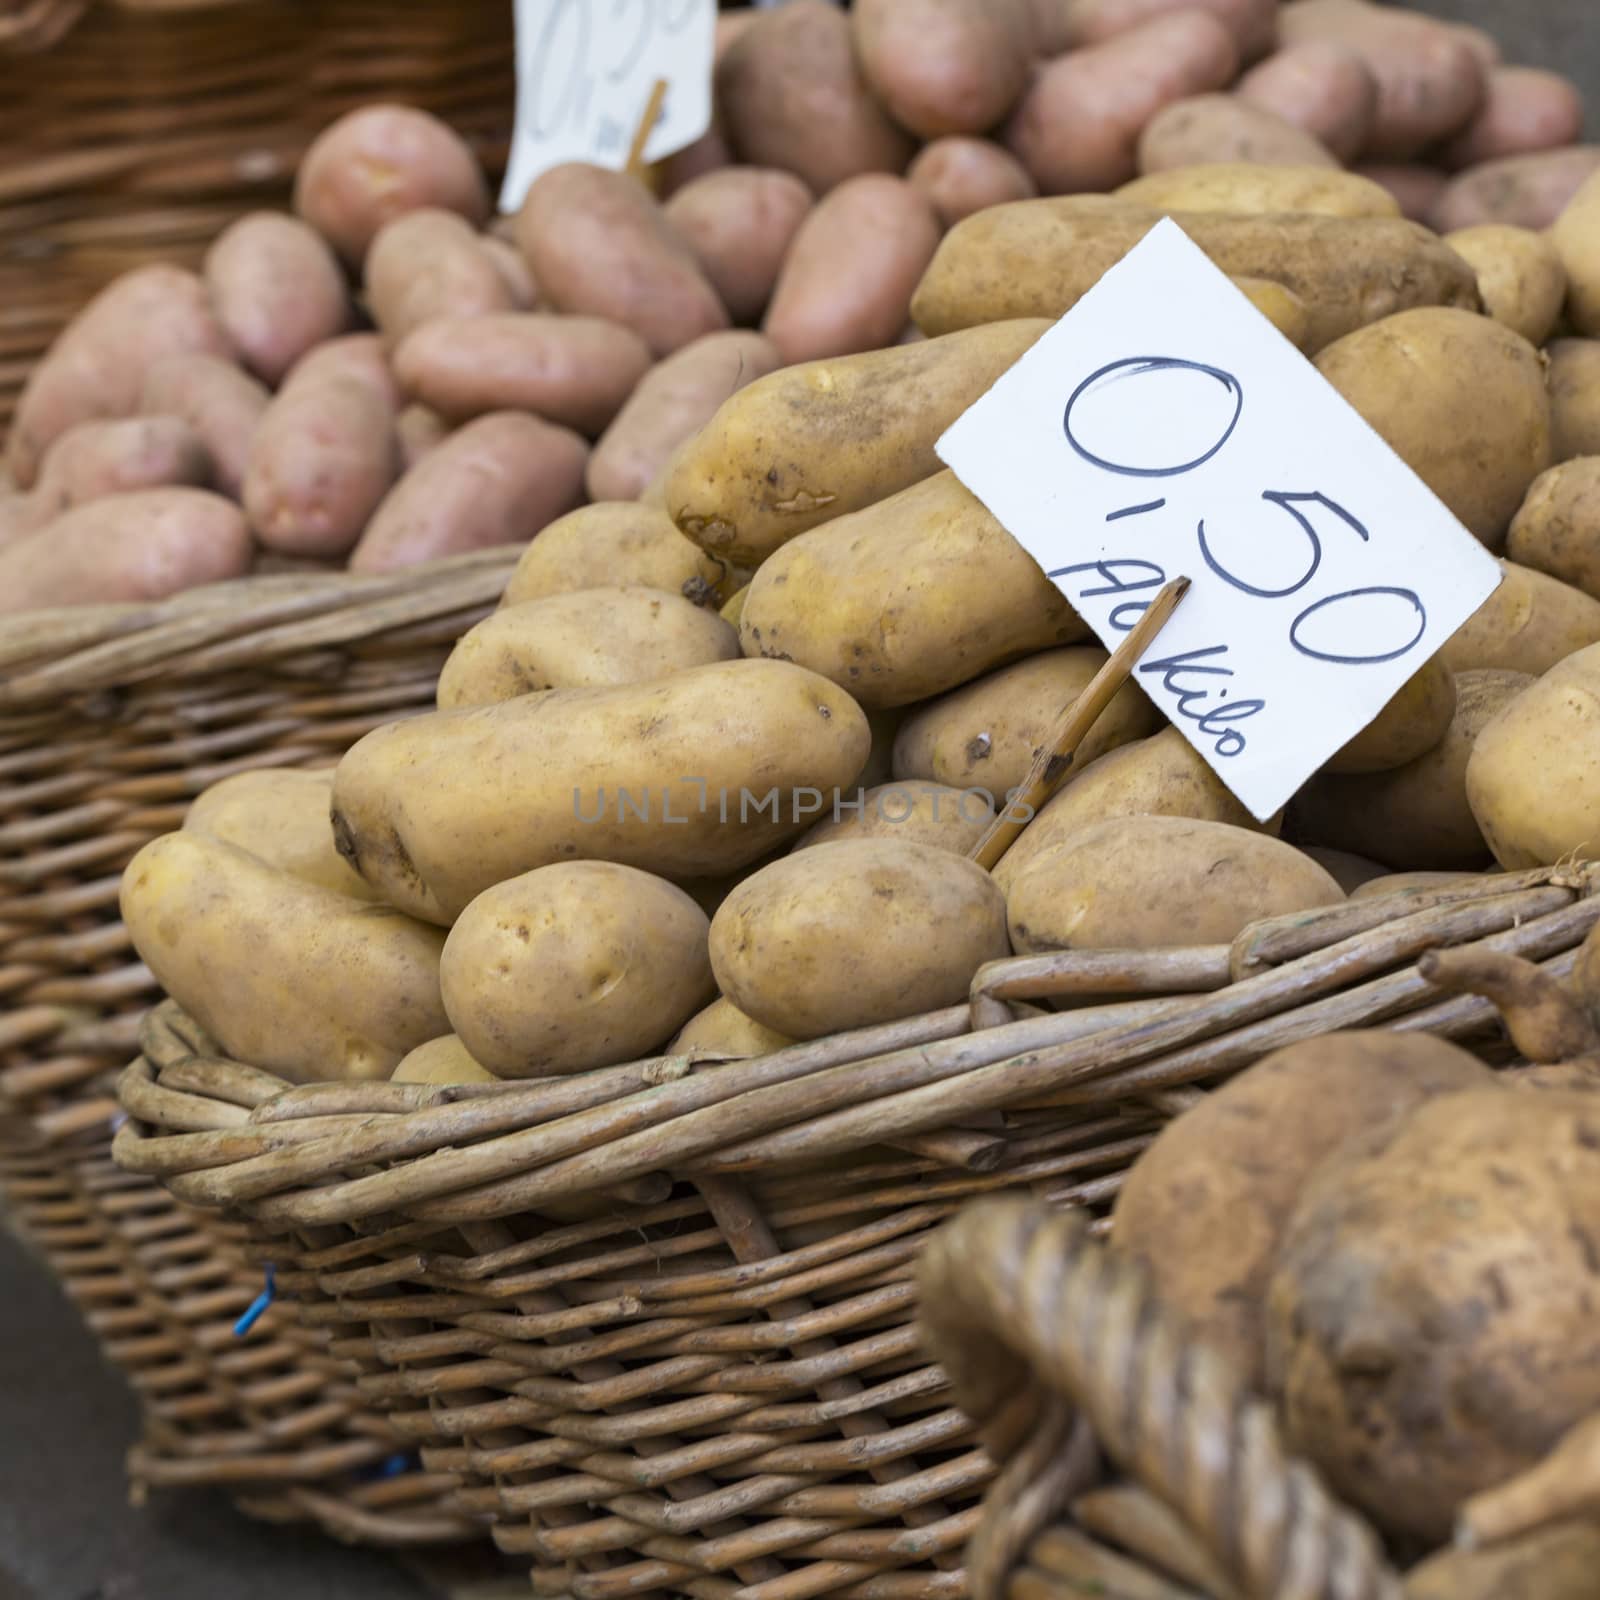 Group of Potatoes in local farmer market.